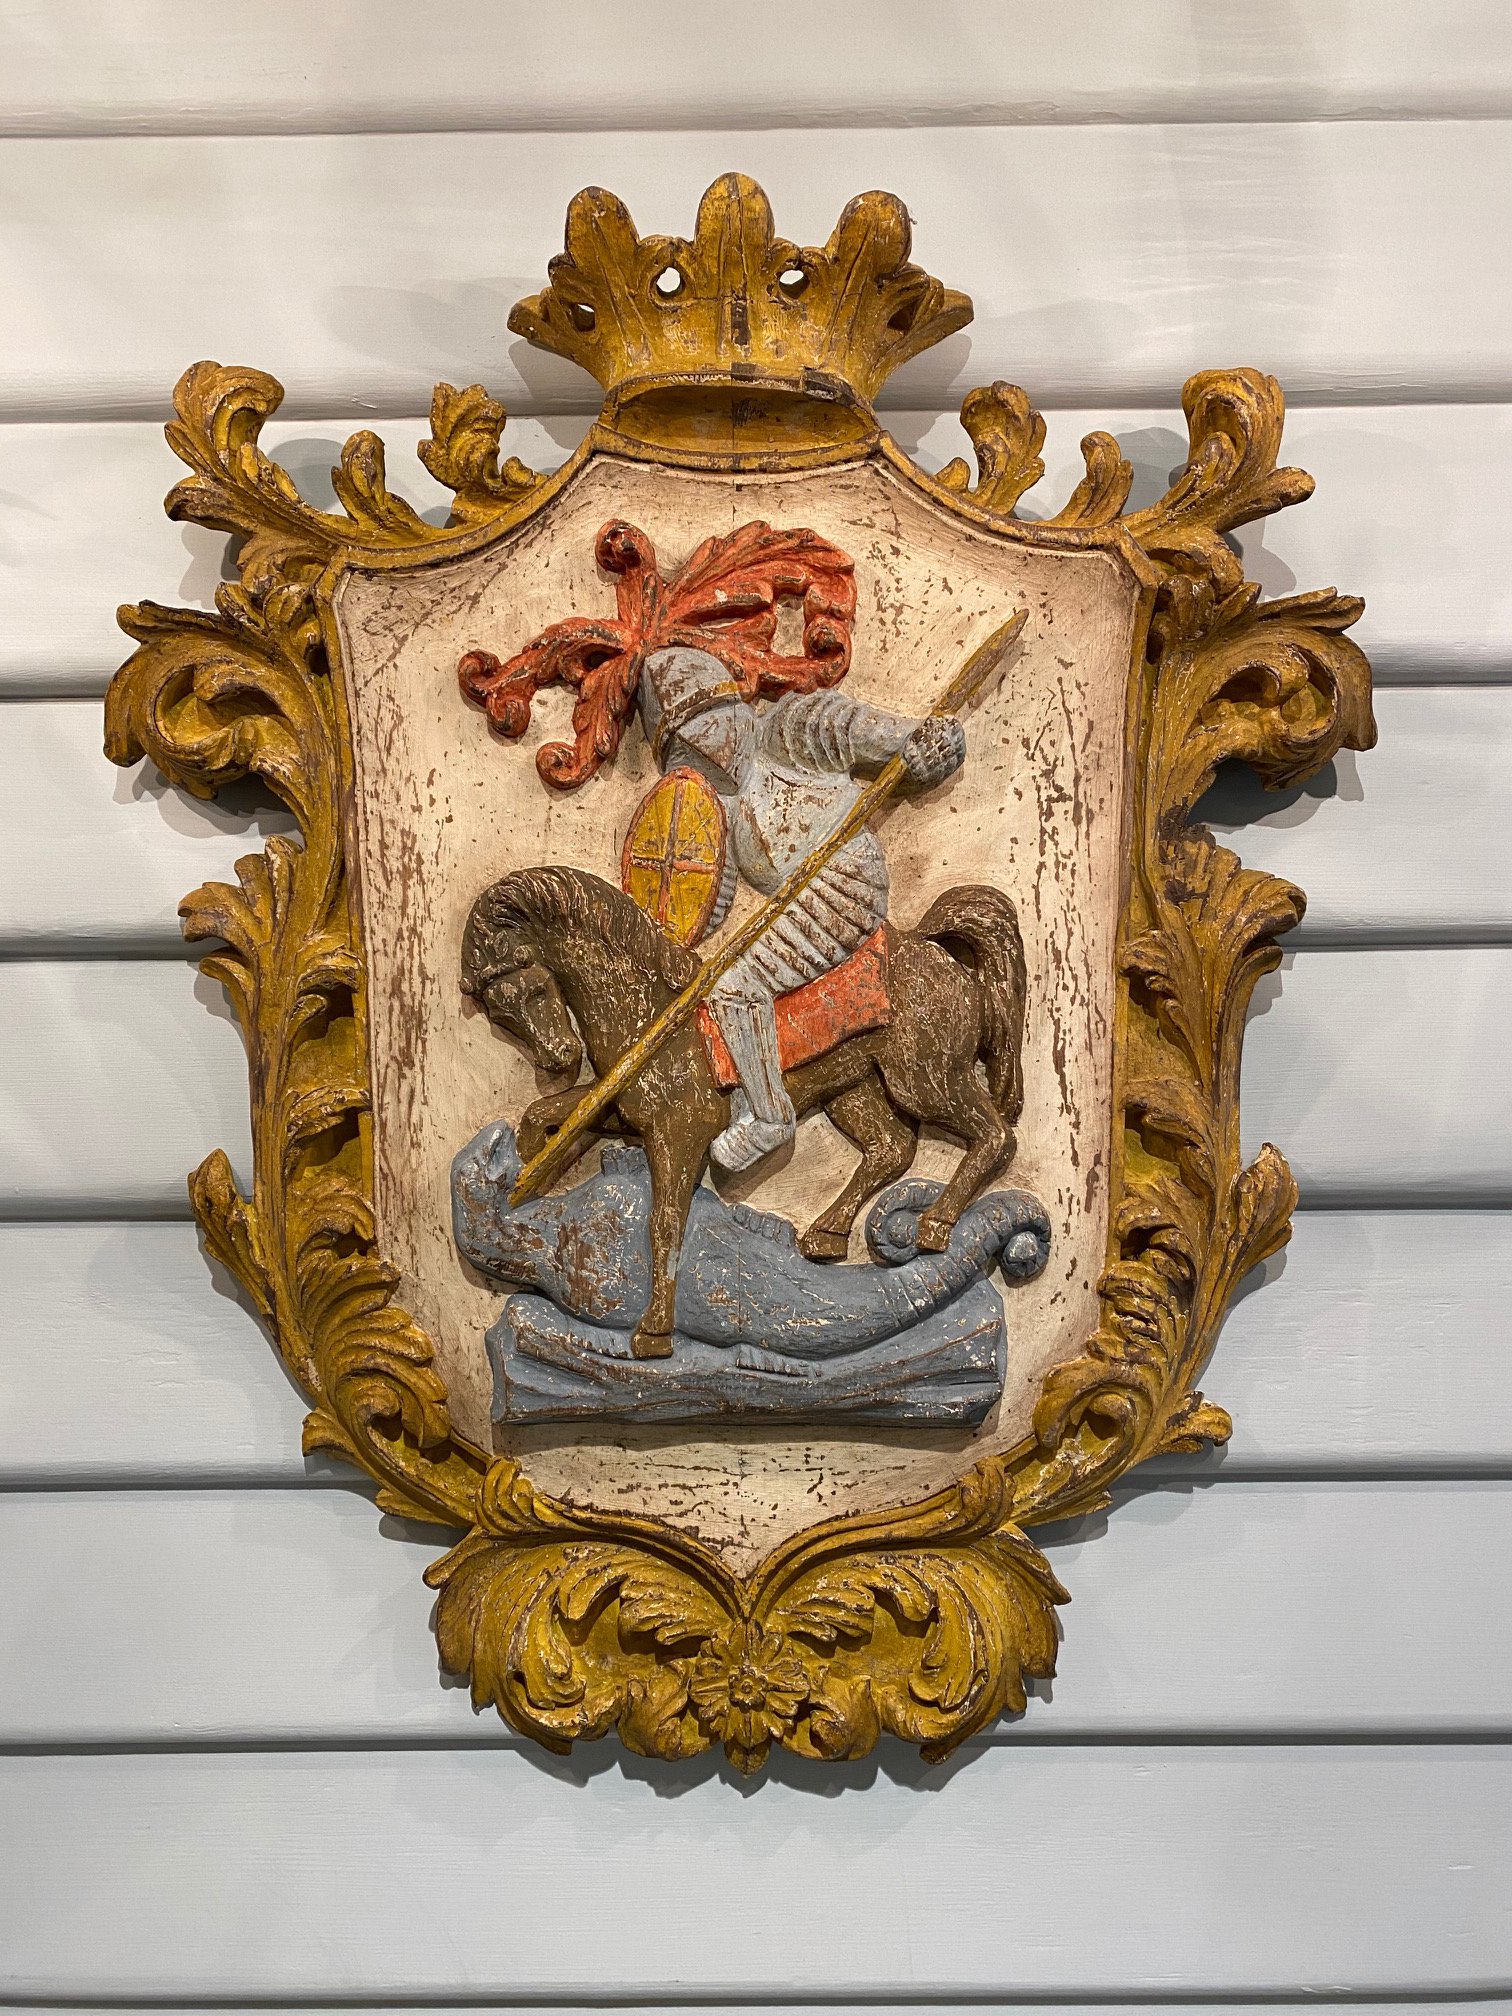 SOLD A highly decorative Italian carved polychrome Coat of Arms